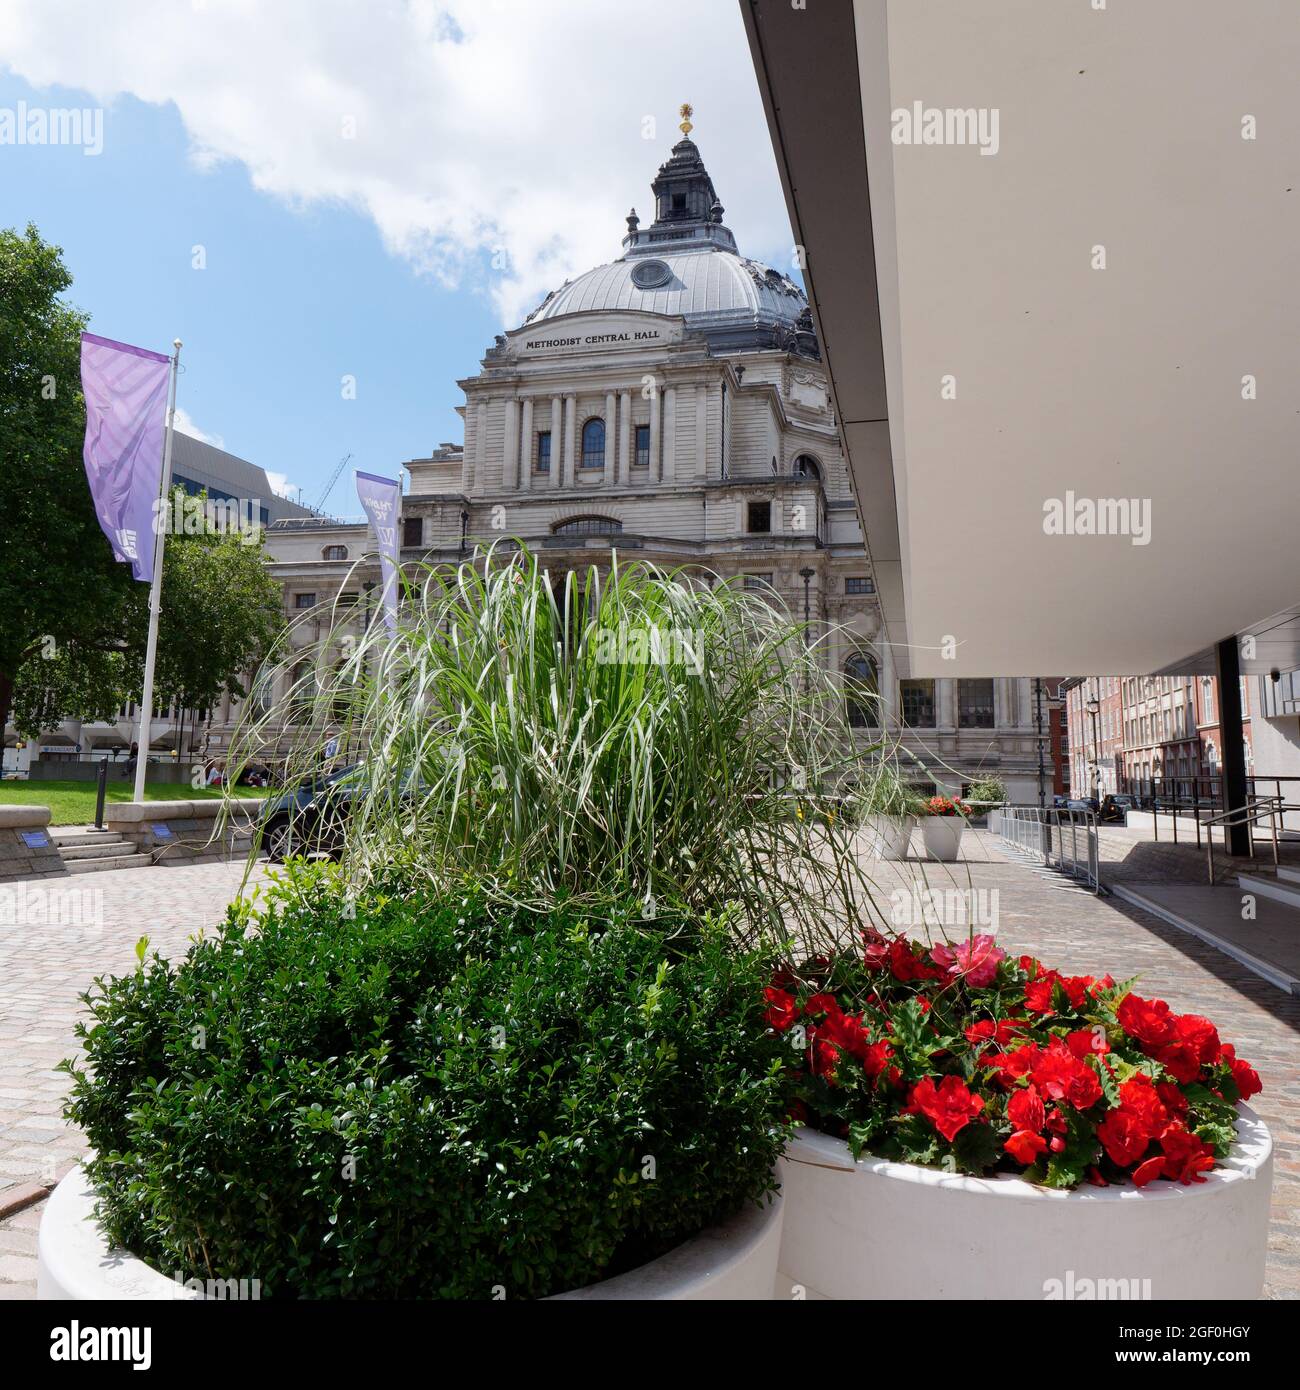 London, Greater London, England, August 10 2021: Flower boxes near Central Hall Westminster aka Methodist Central Hal. Stock Photo